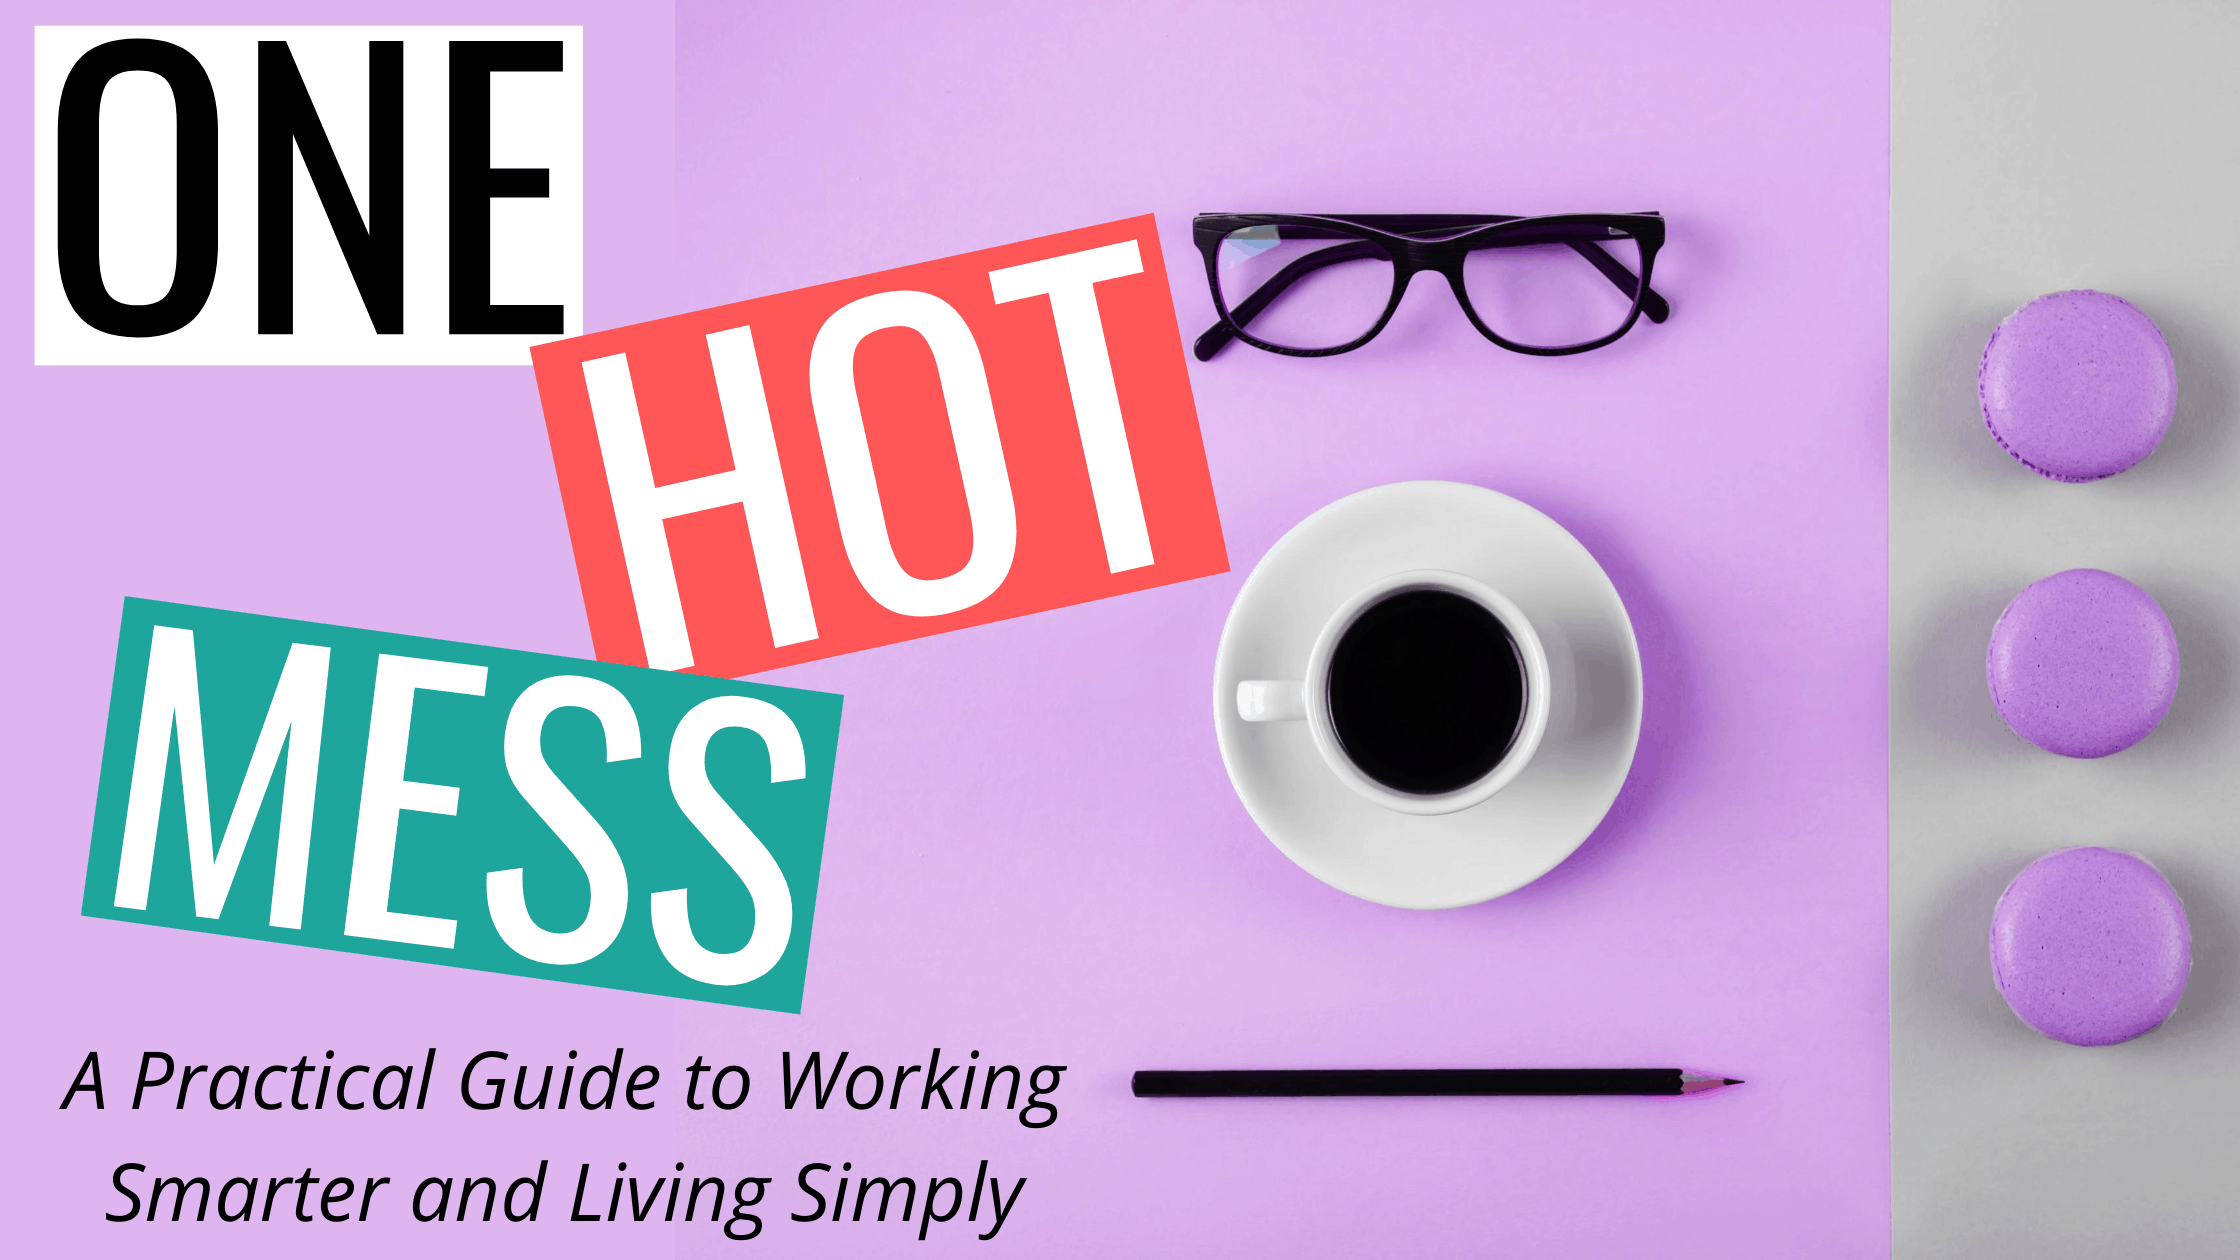 One Hot Mess A Practical Guide to Working Smarter and Living Simply